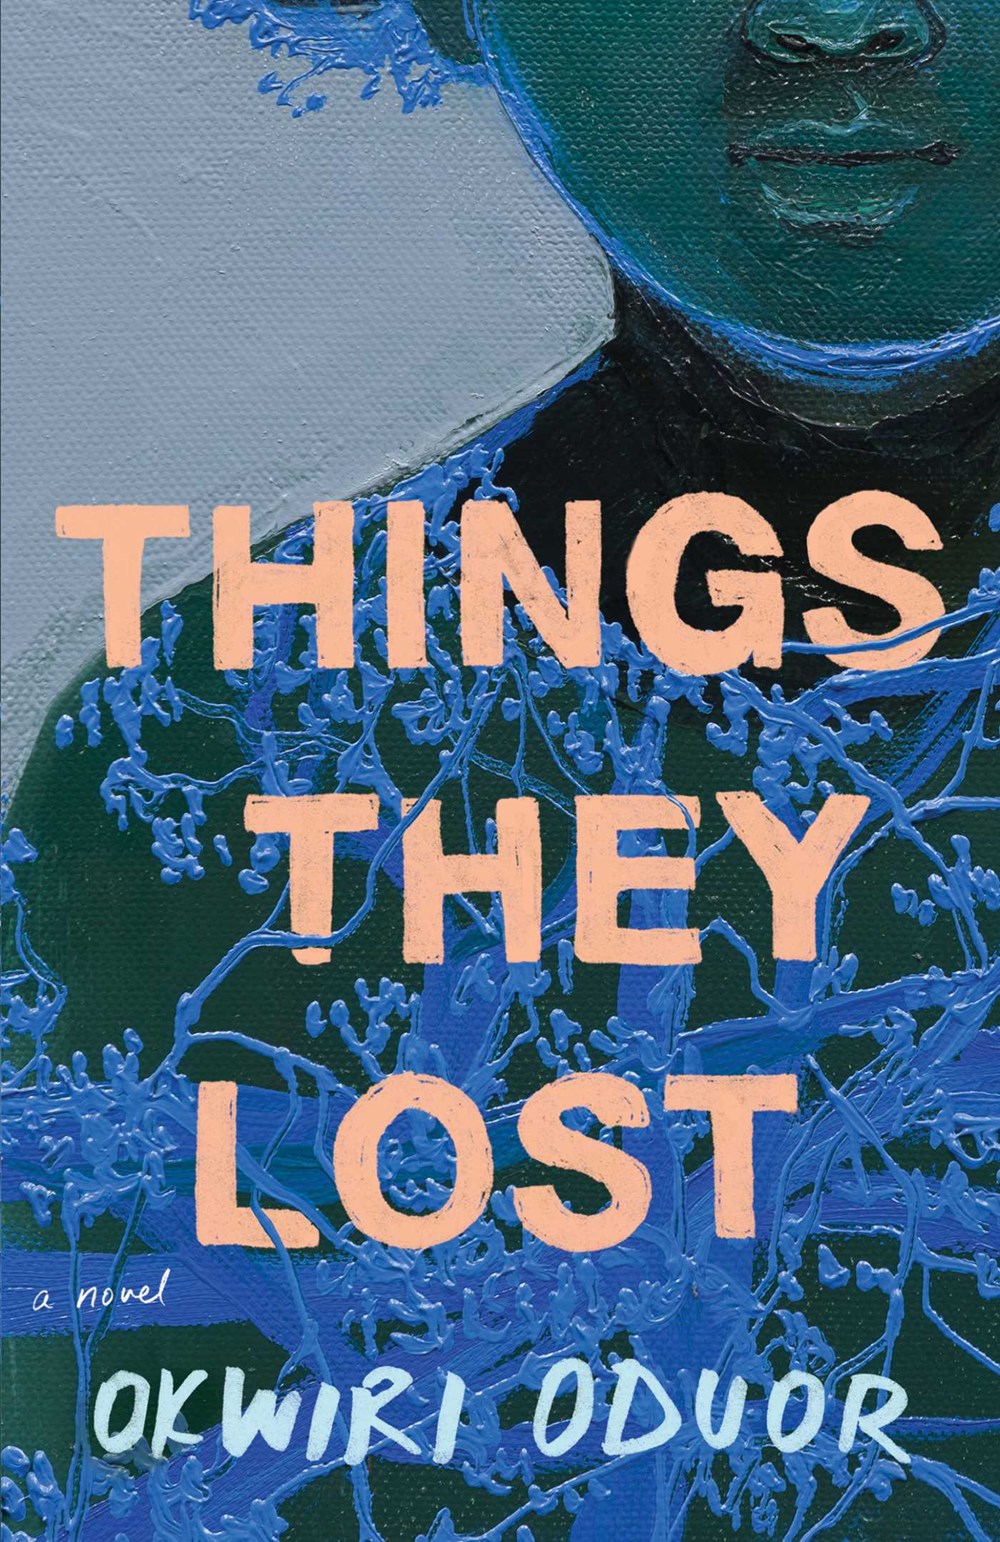 Image of "Things They Lost"